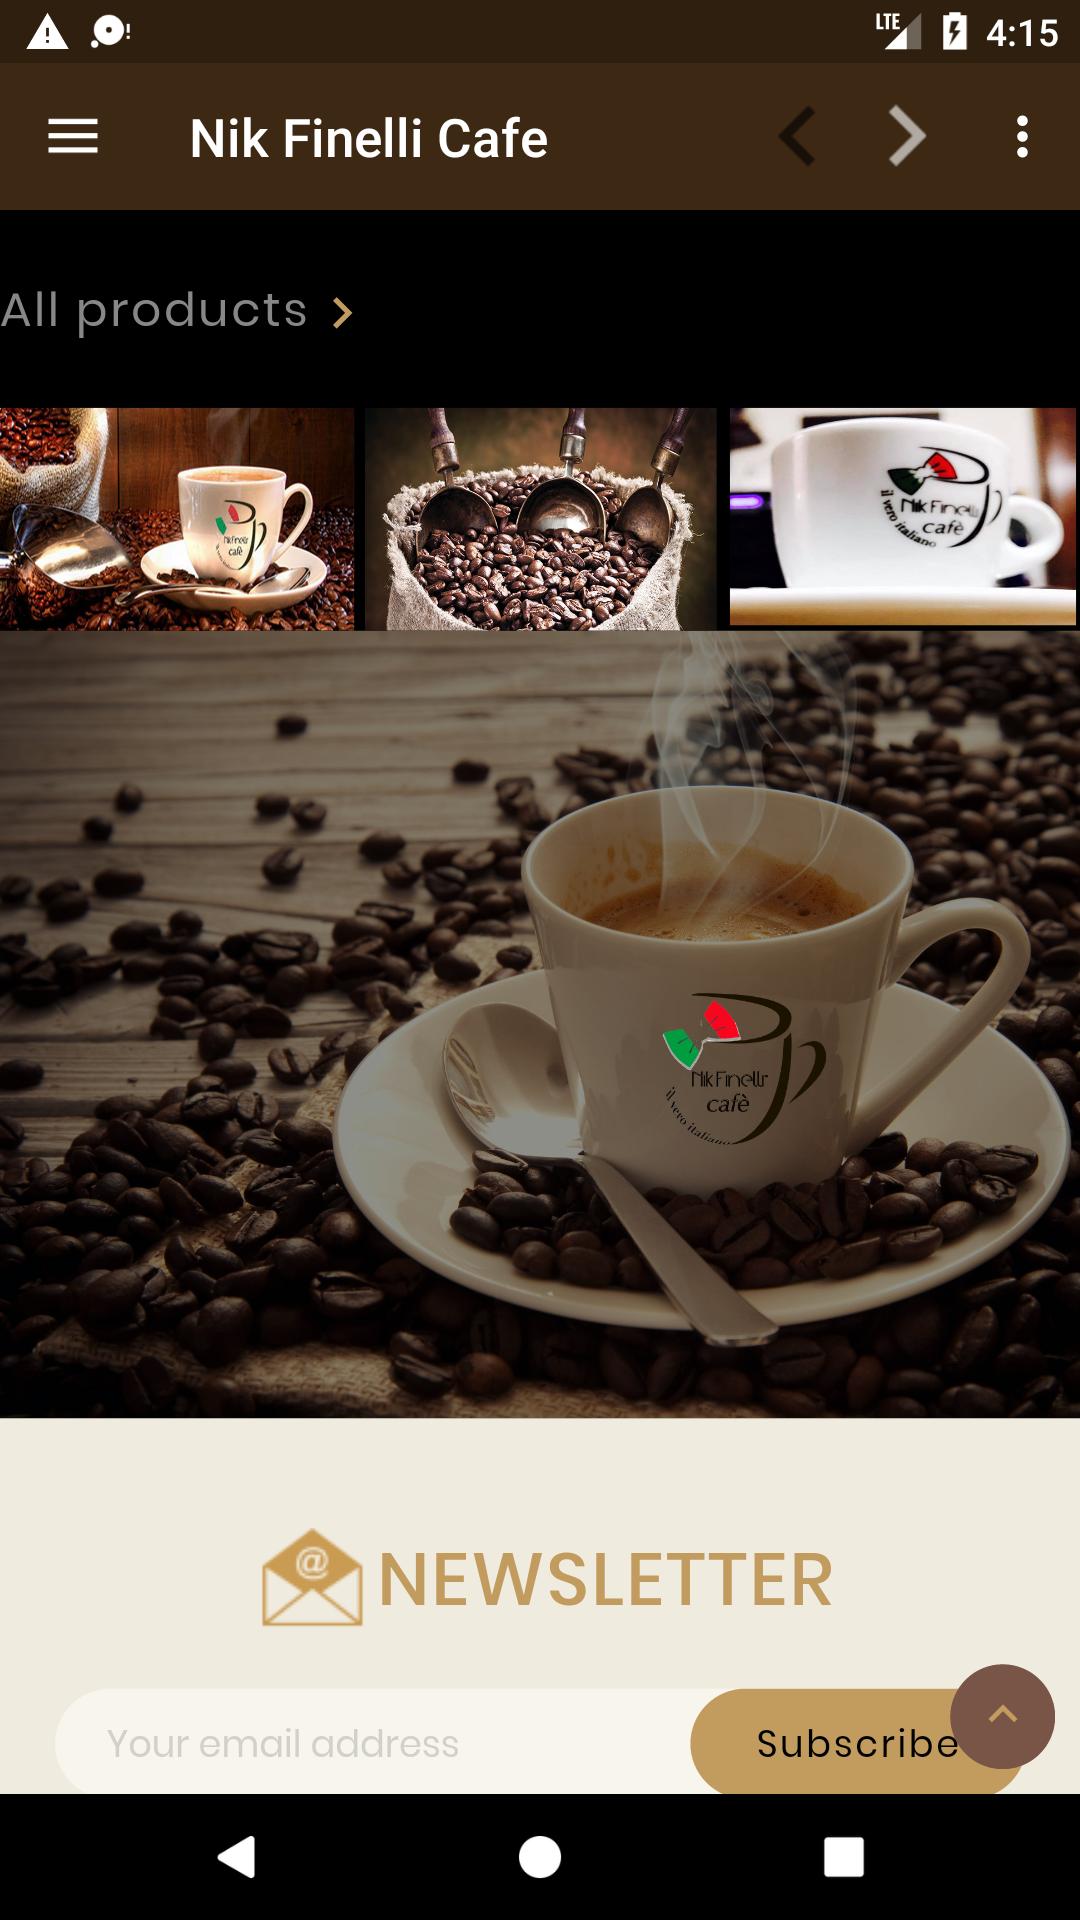 Nik Finelli Cafe for Android - APK Download